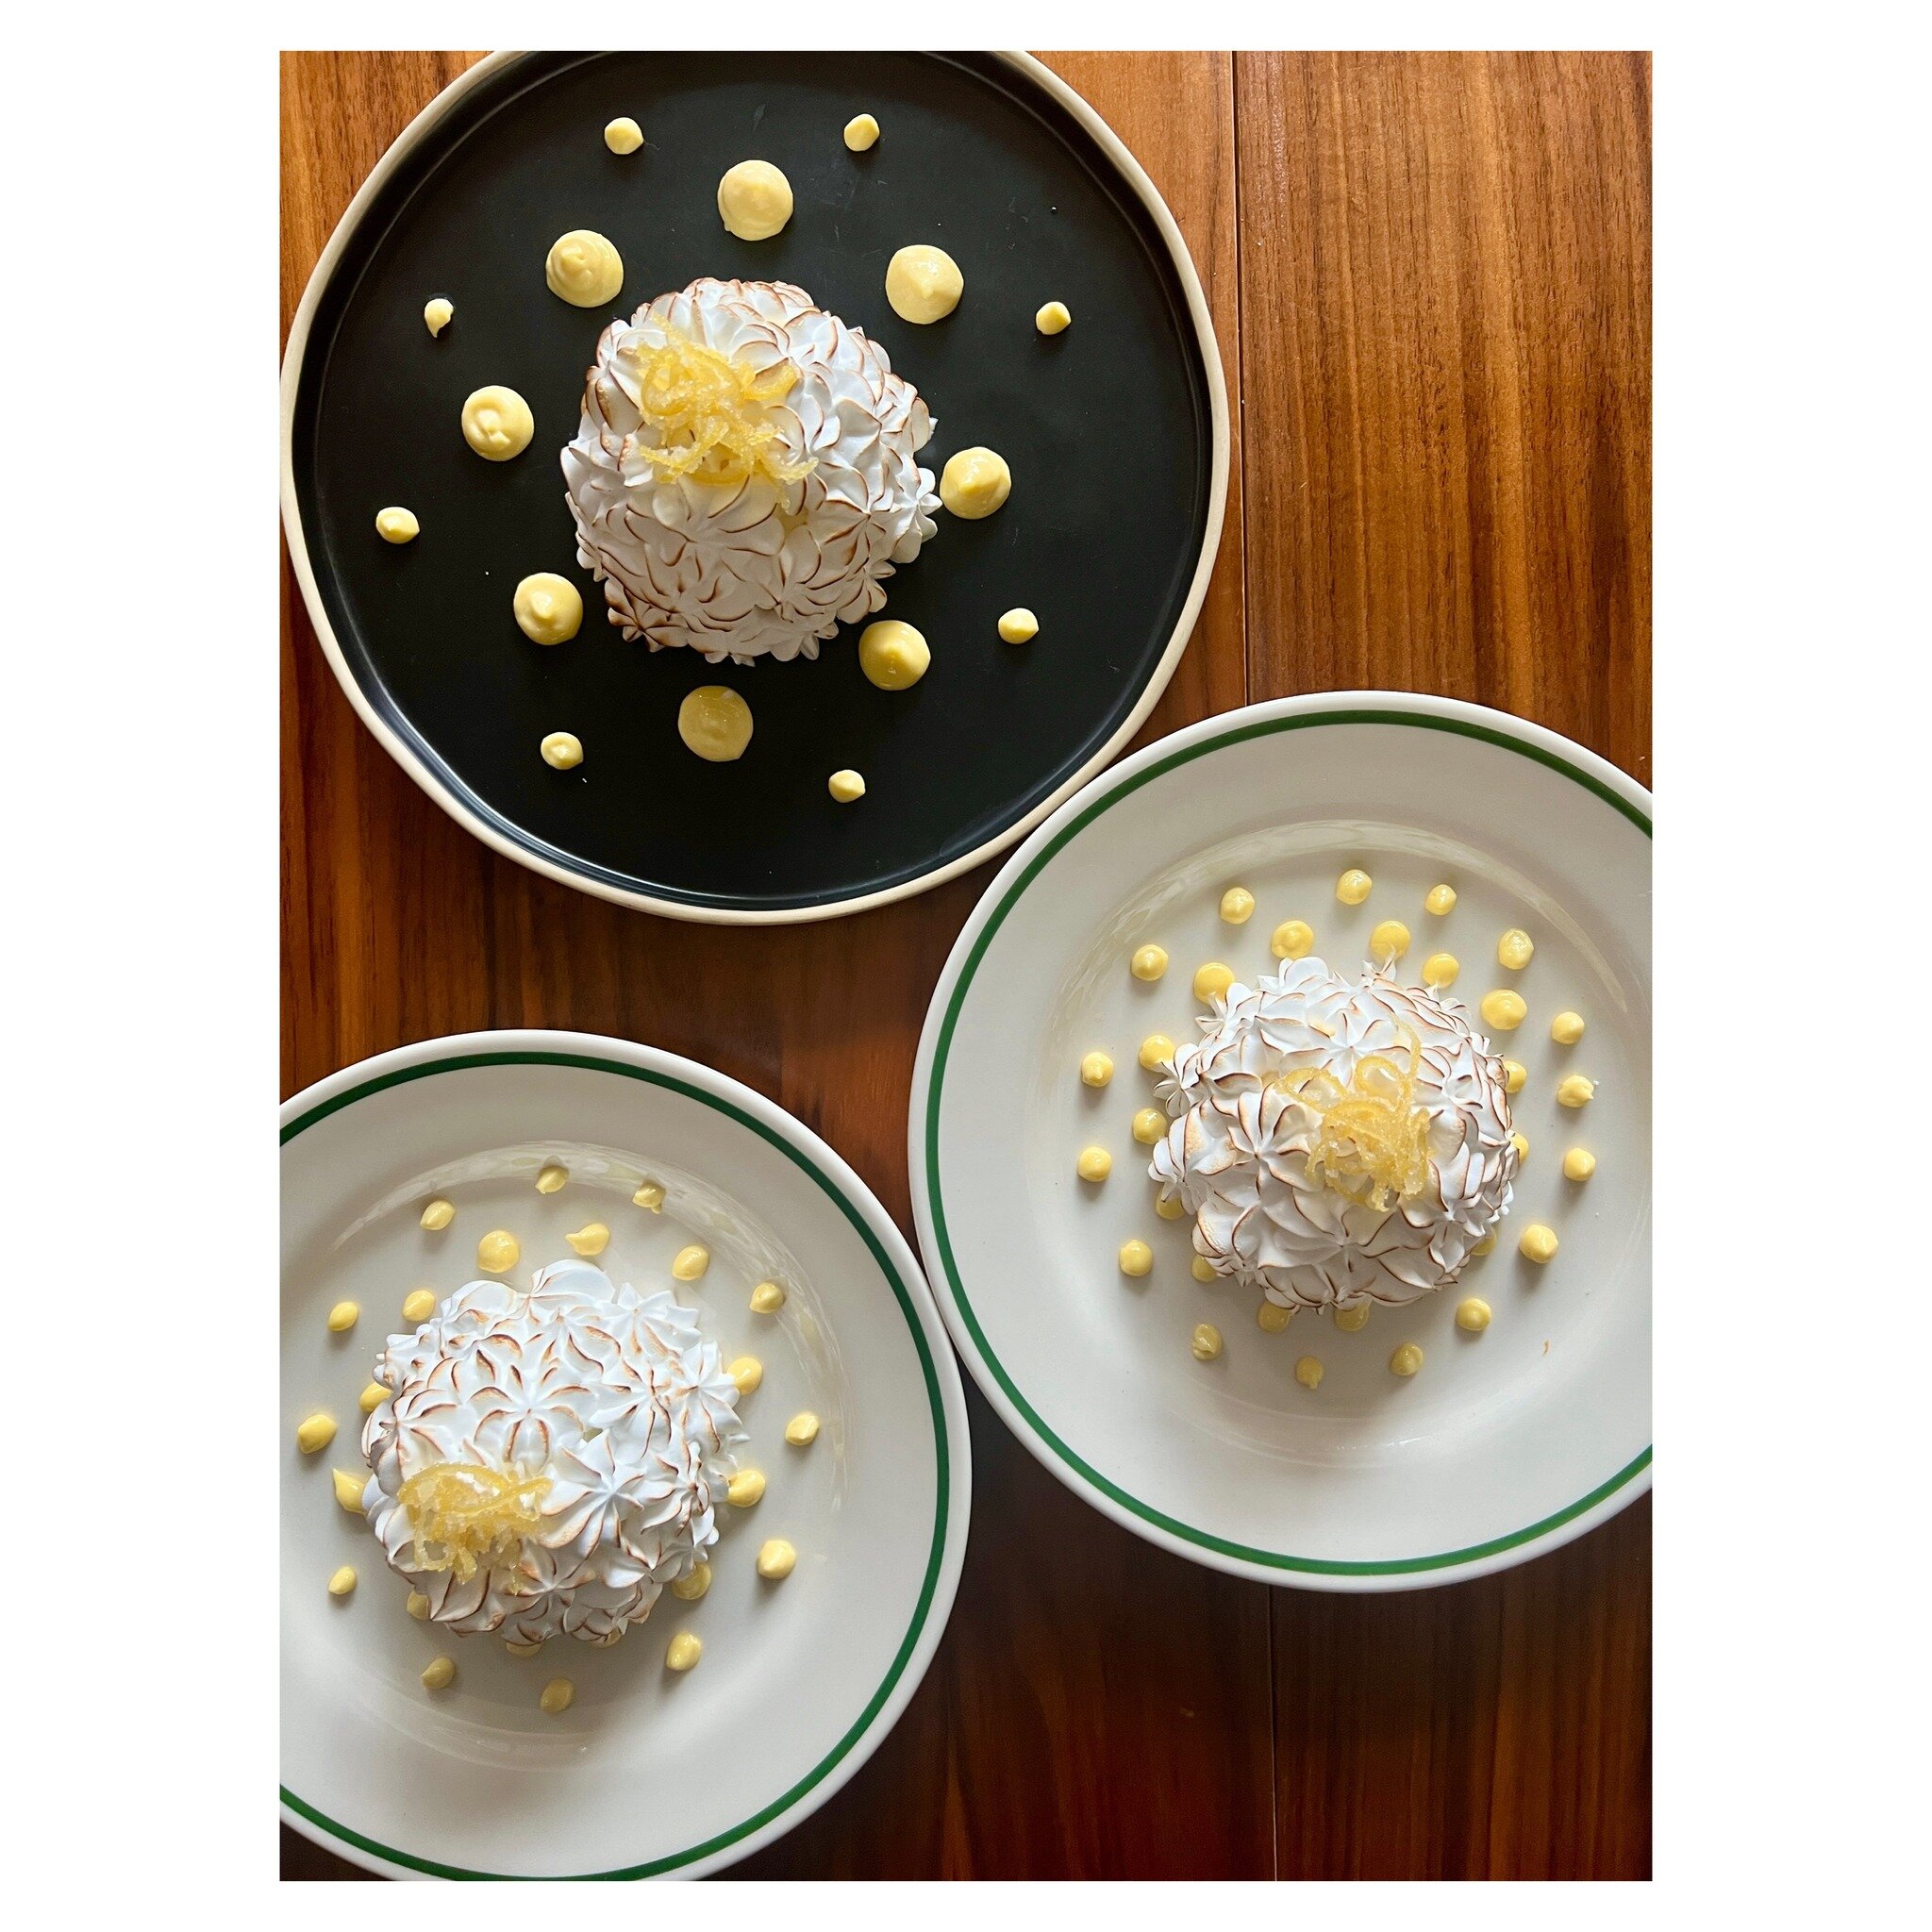 She is beauty, she is grace, she is the sweet new dessert for your face. We&rsquo;re dropping two new desserts today including this delightful lemon meringue Bombe Alaska. It embraces lemon three ways&mdash;lemon ice cream, curd, and candied zest wit